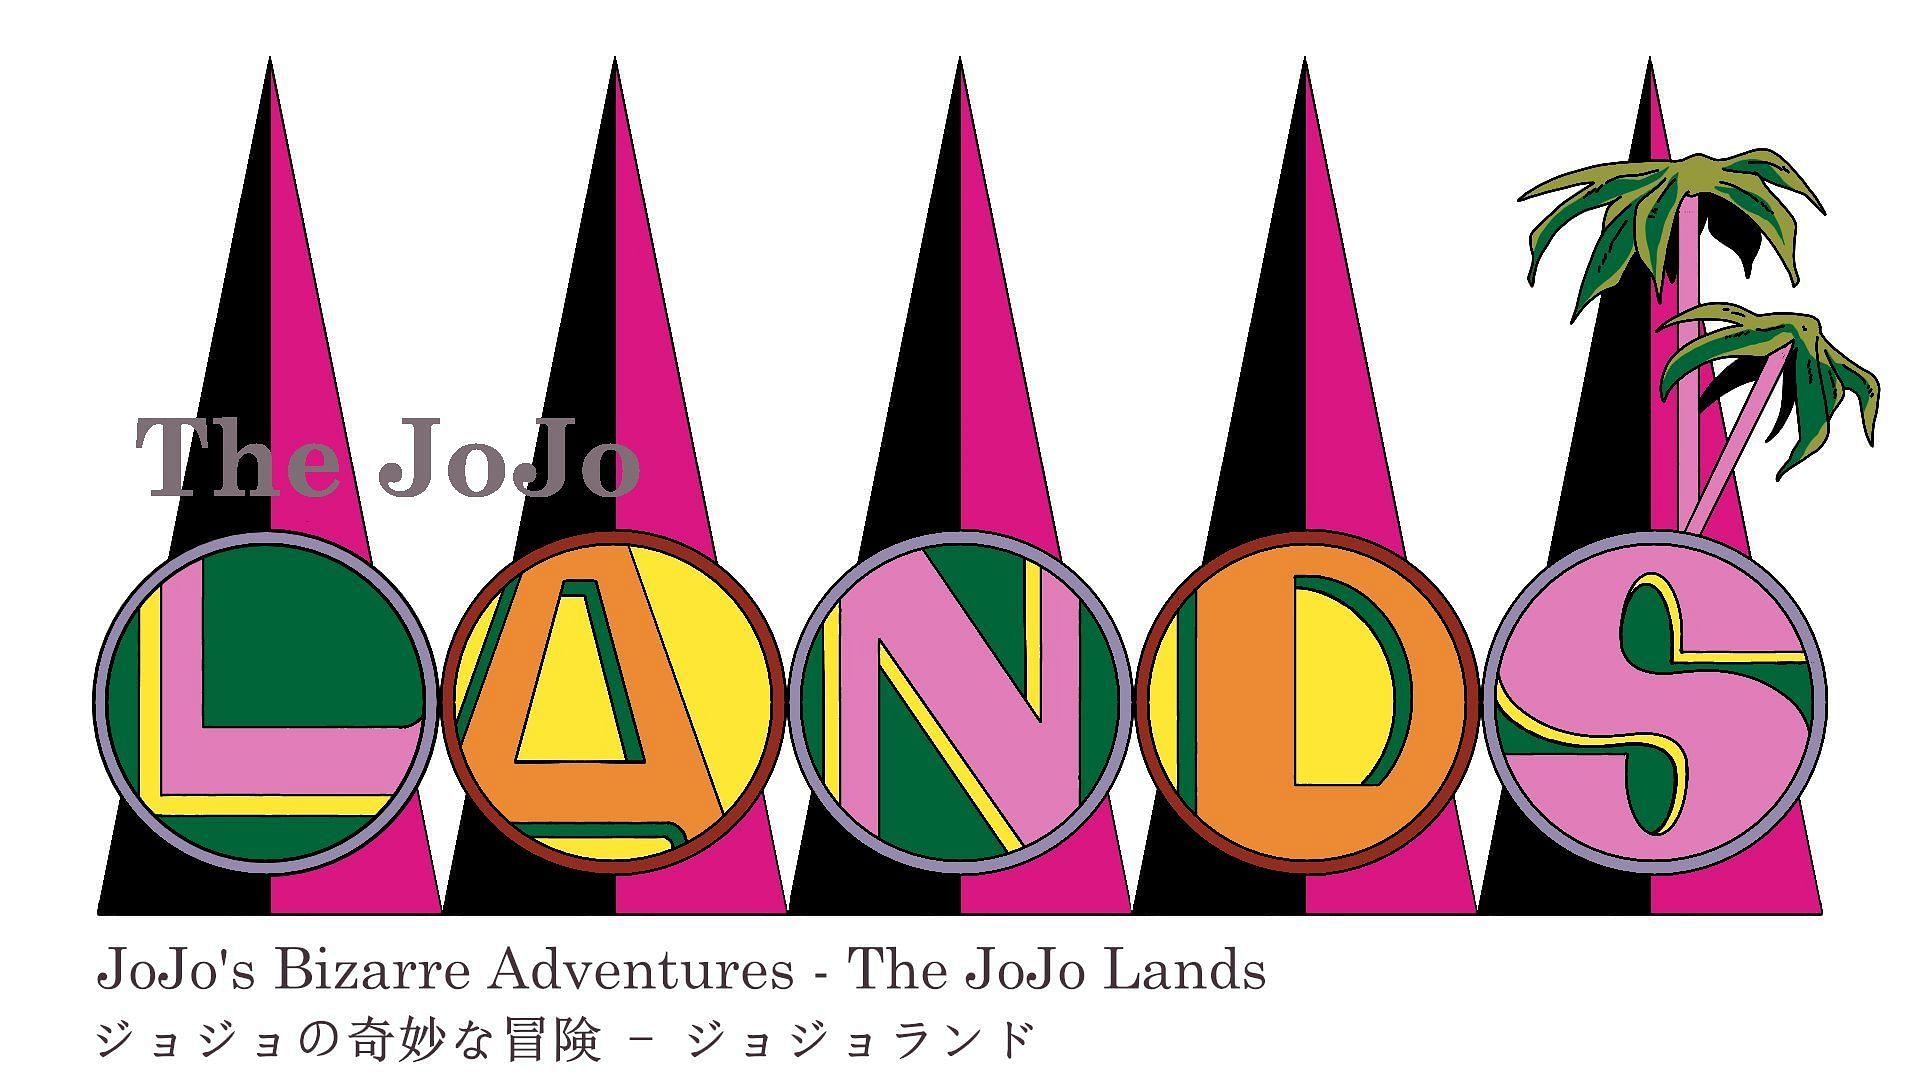 Fans get their first look at the JoJoLands plot in January